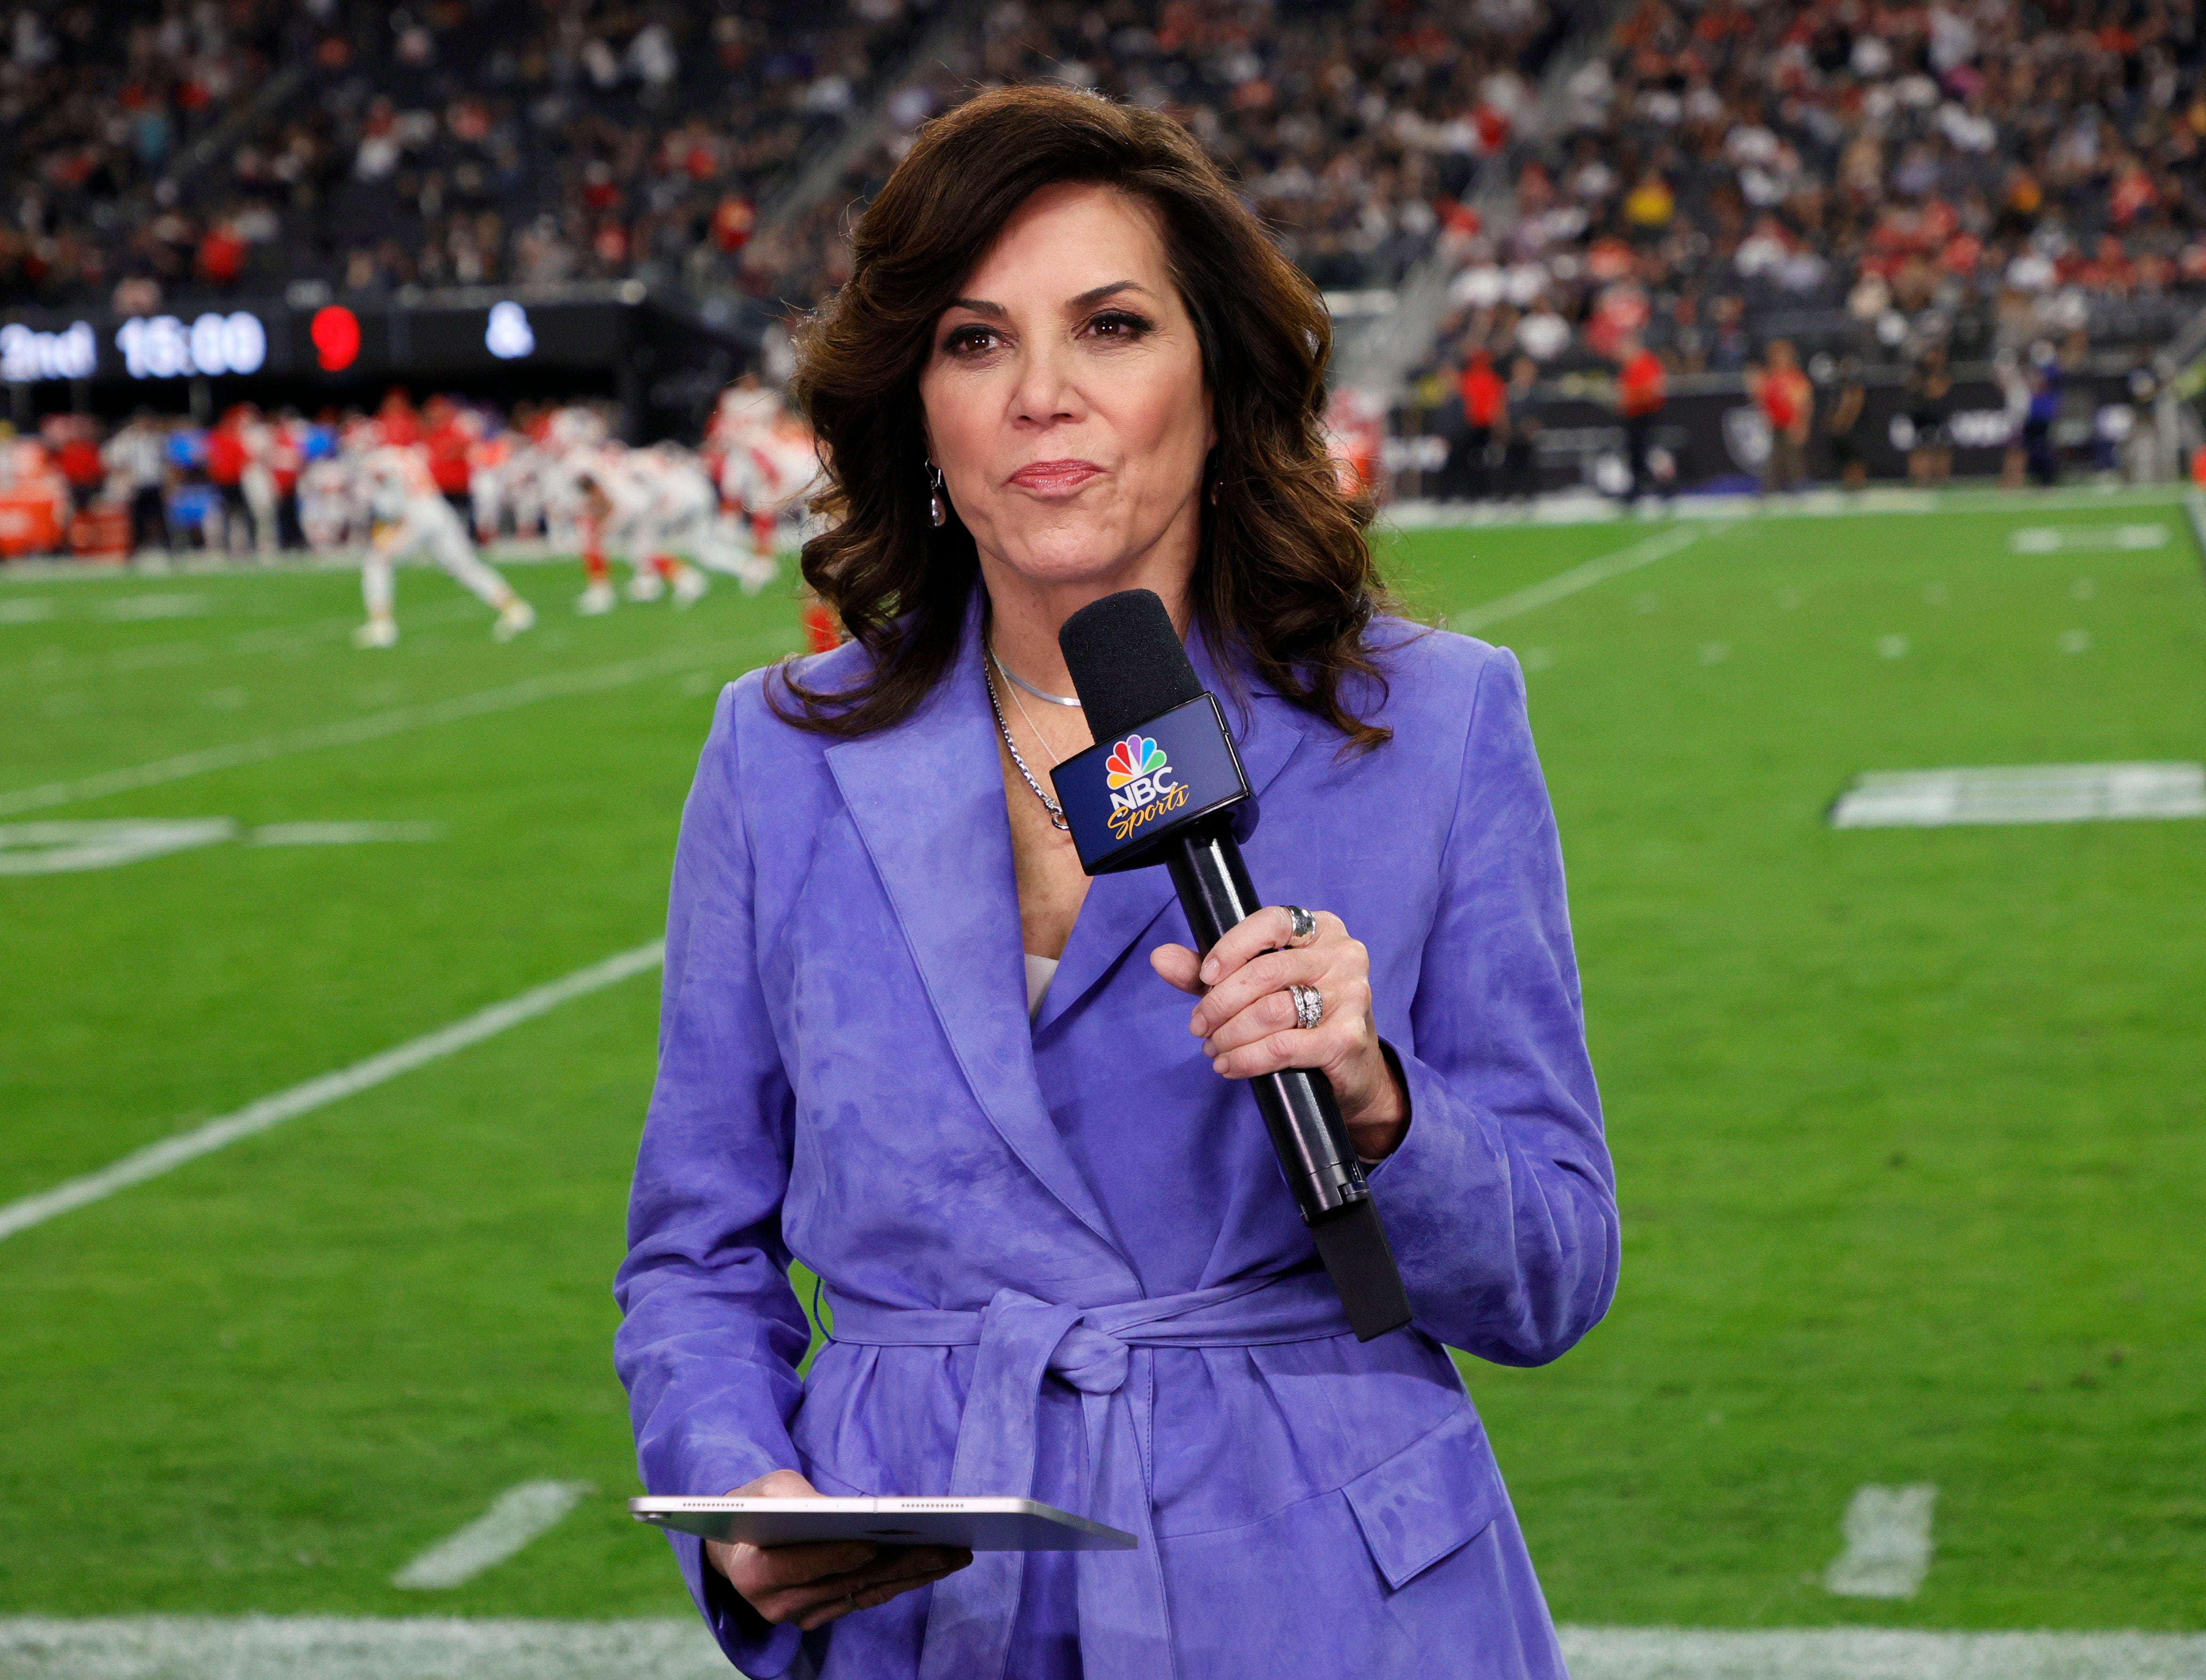 Michele Tafoya explained her decision to leave NBC sports and to get involv...